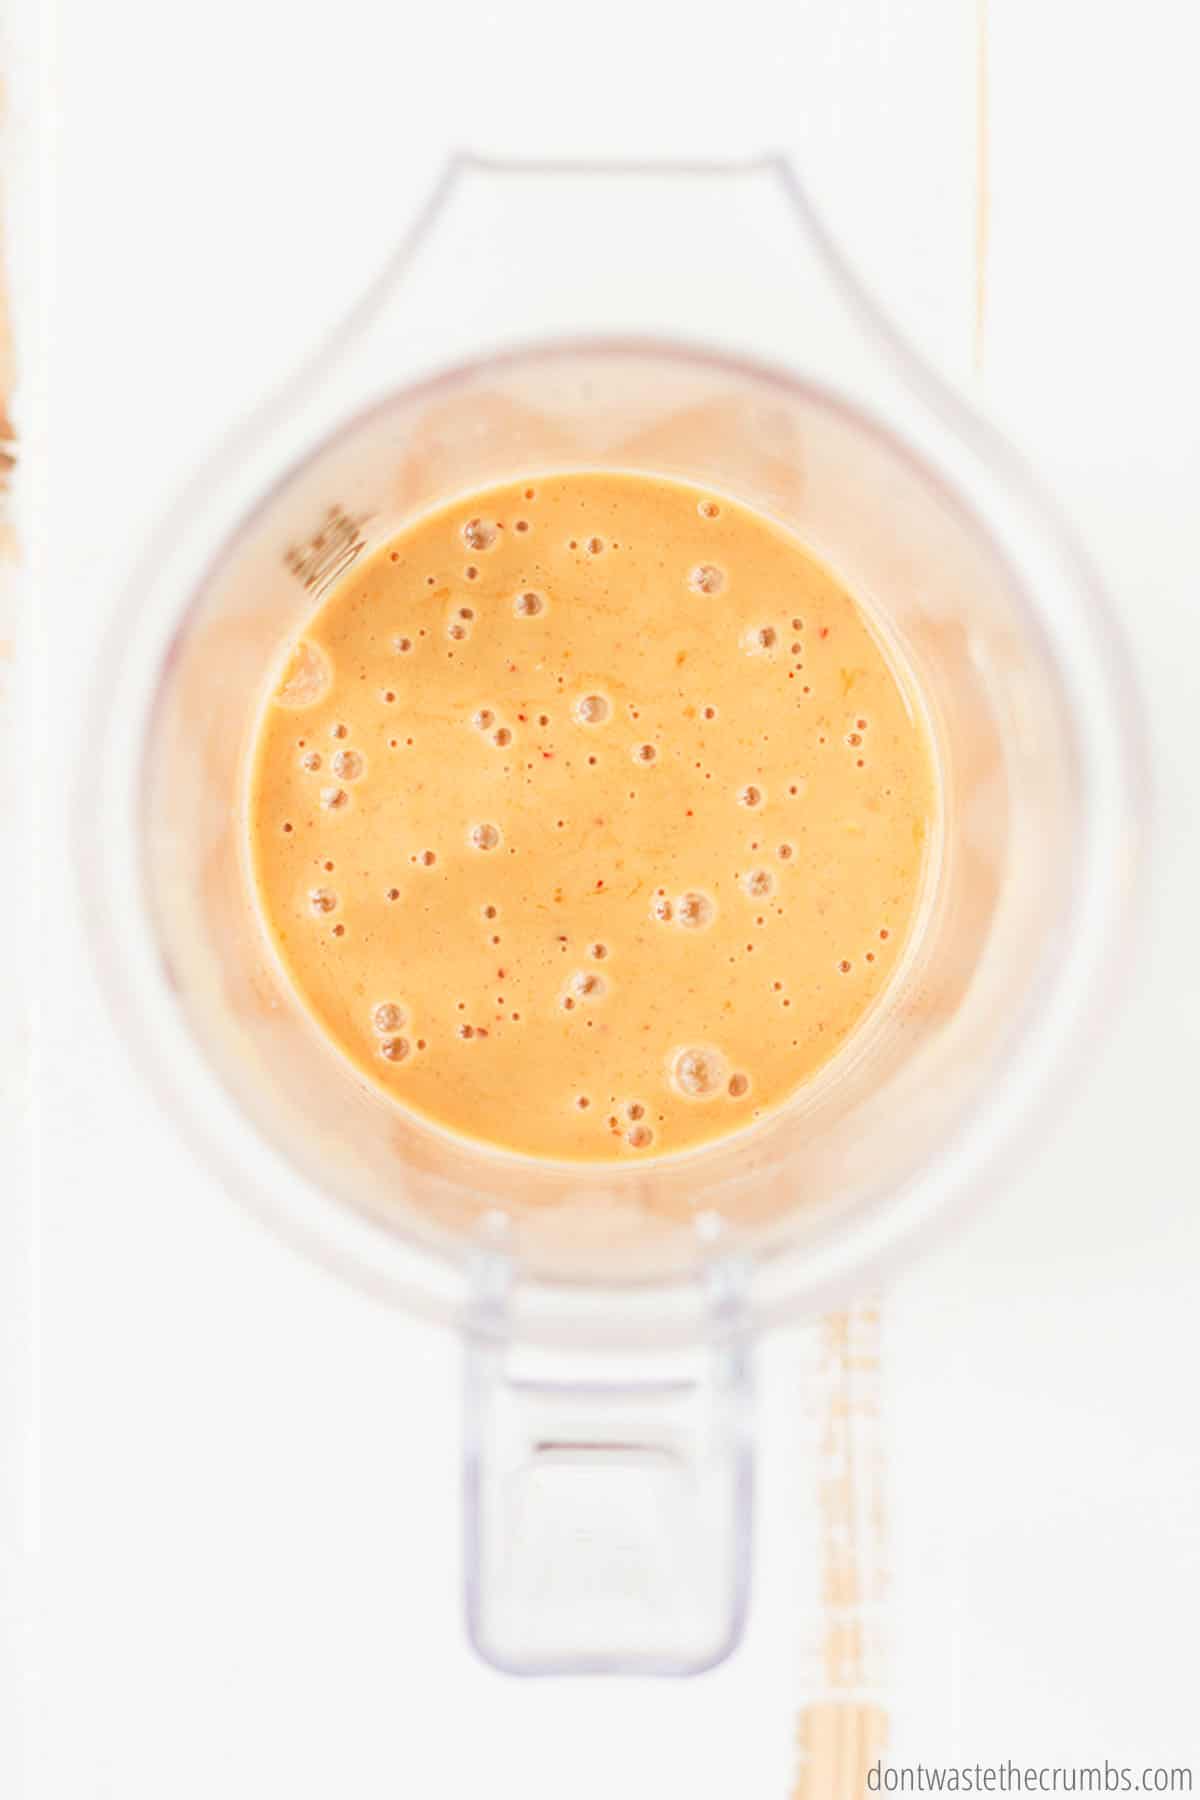 Thai peanut sauce is blended to a smooth and liquid-like consistency in the blender, pureed to a golden brown color.